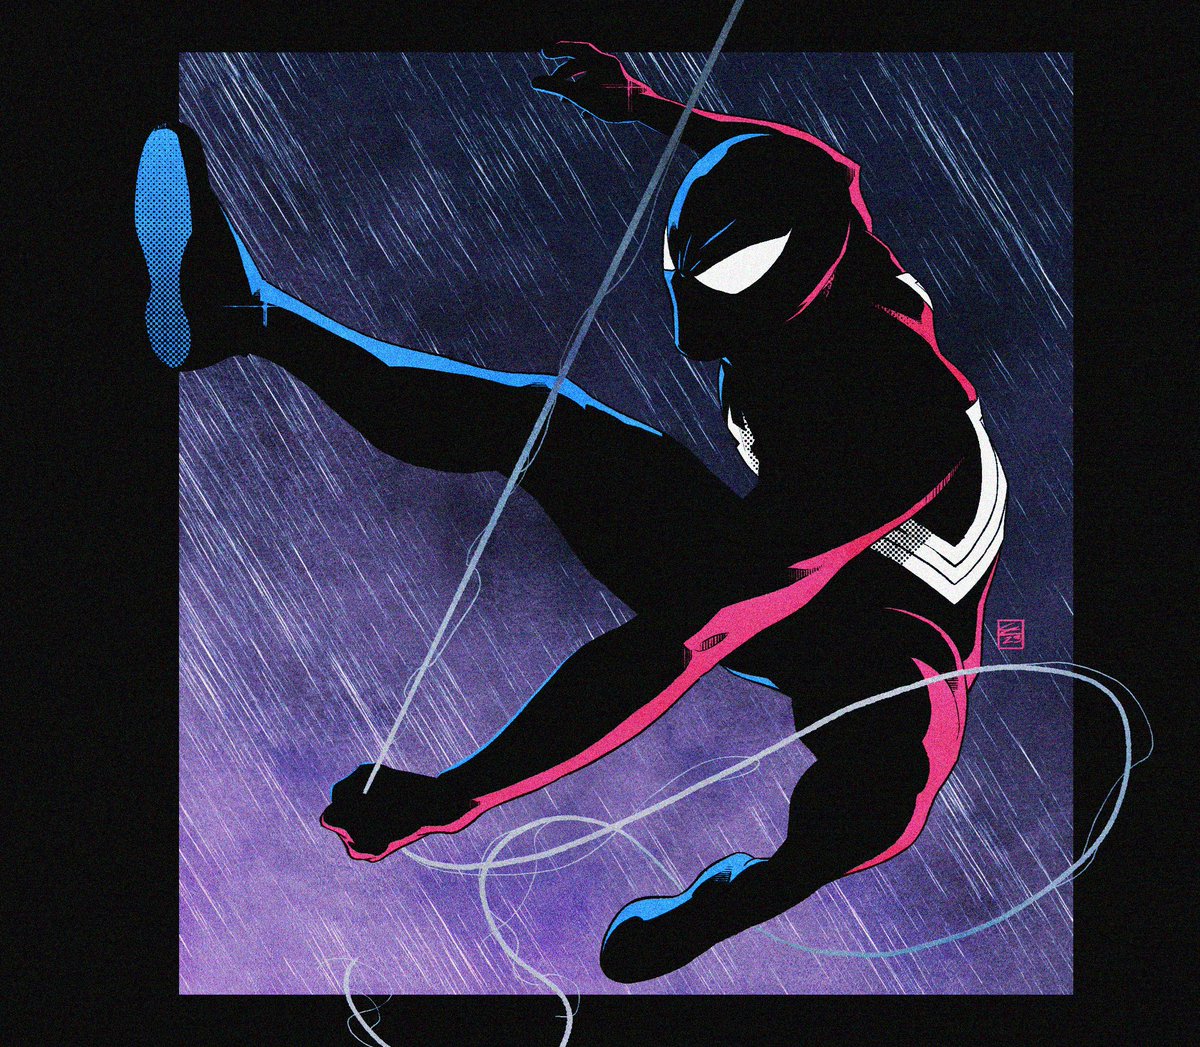 RT @TheMarvelousMrC: Symbiote Spider-Man, giving that Animated Series blue/red colour scheme a try https://t.co/eFbJD6vWEL